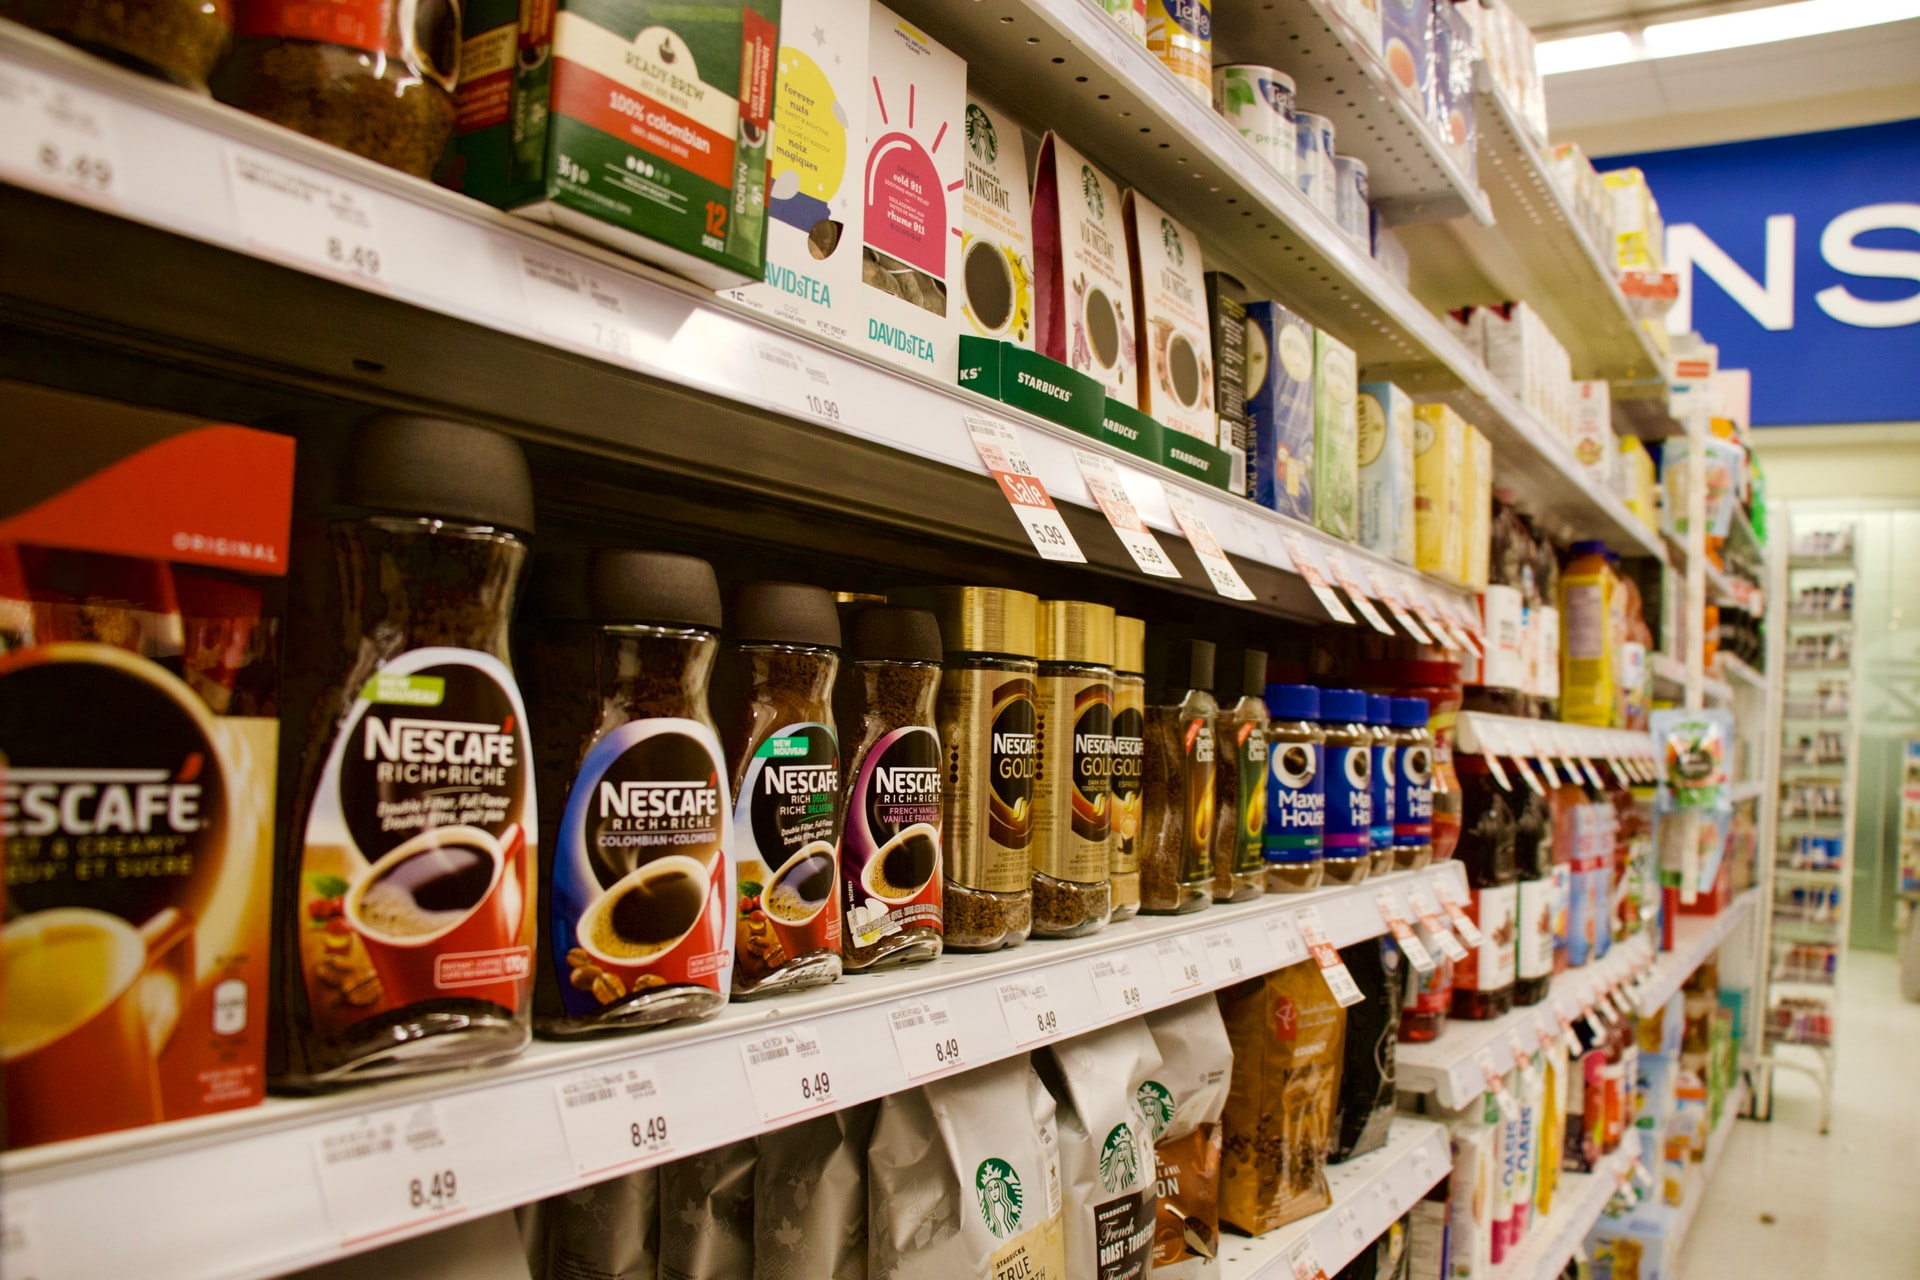 Product transparency is critical for CPG brands